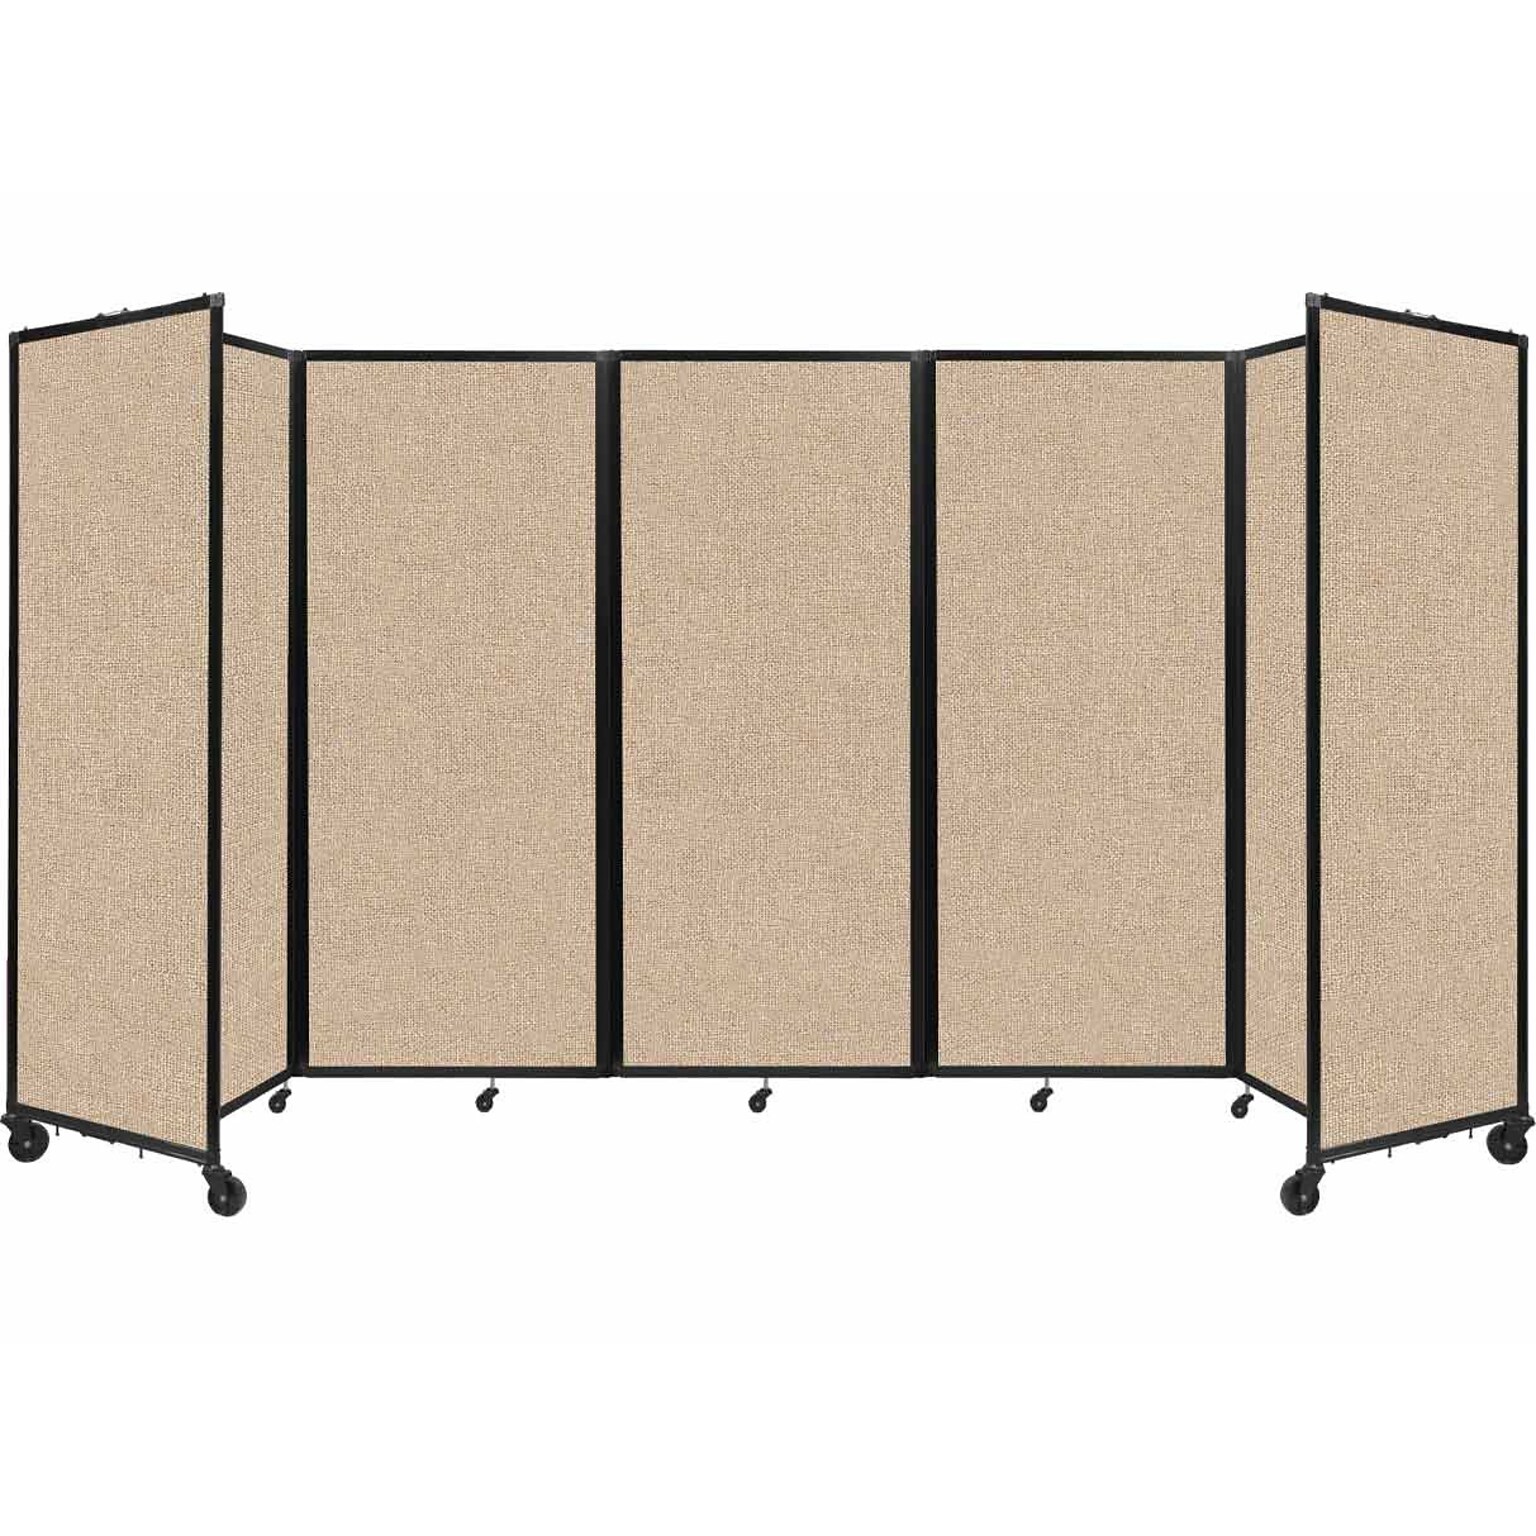 Versare The Room Divider 360 Freestanding Folding Portable Partition, 82H x 168W, Beige Fabric (1182501)